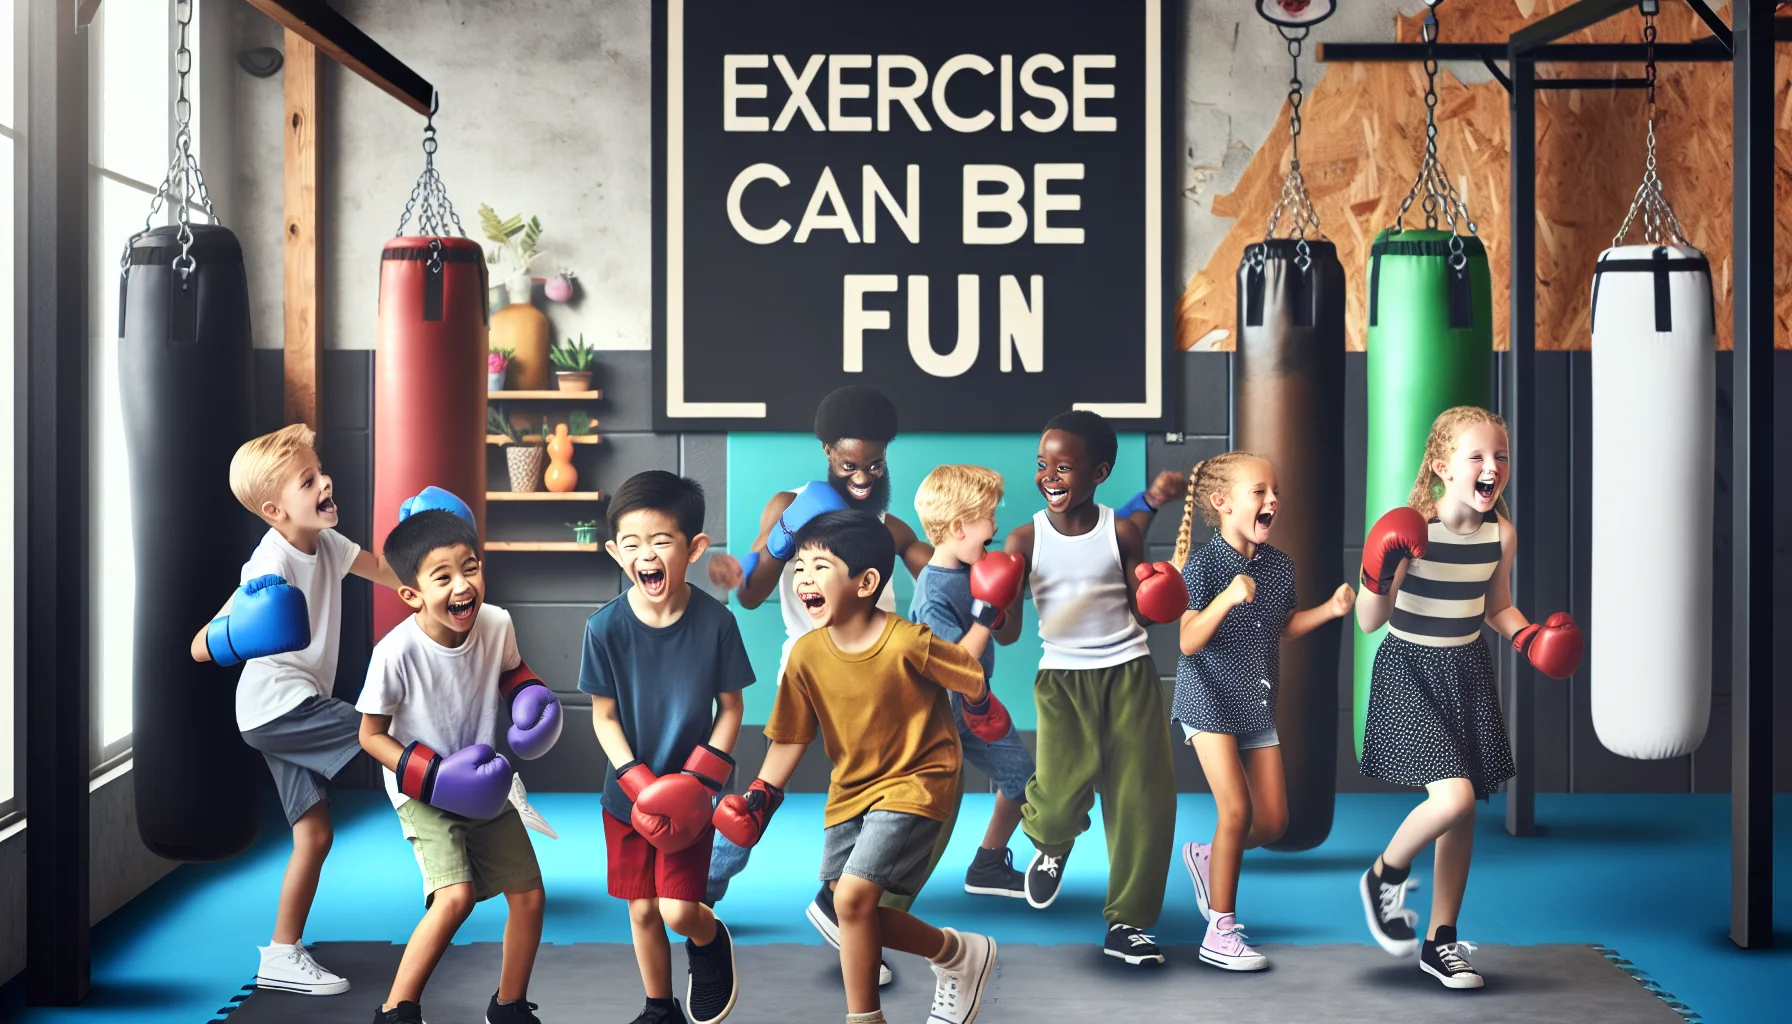 Create a vivid and amusing image where a group of diverse children are engaging in kickboxing near a sign that reads 'Exercise can be fun'. The setting is a spacious, well-equipped gym filled with kickboxing gear such as gloves, punching bags, and protective gear. Children of different descents such as Caucasian, Black, Asian and Hispanic are participating: some are sparing, while others are laughing and performing exaggerated kickboxing moves. All are visibly enjoying themselves, emphasizing the idea that exercise can be enjoyable.